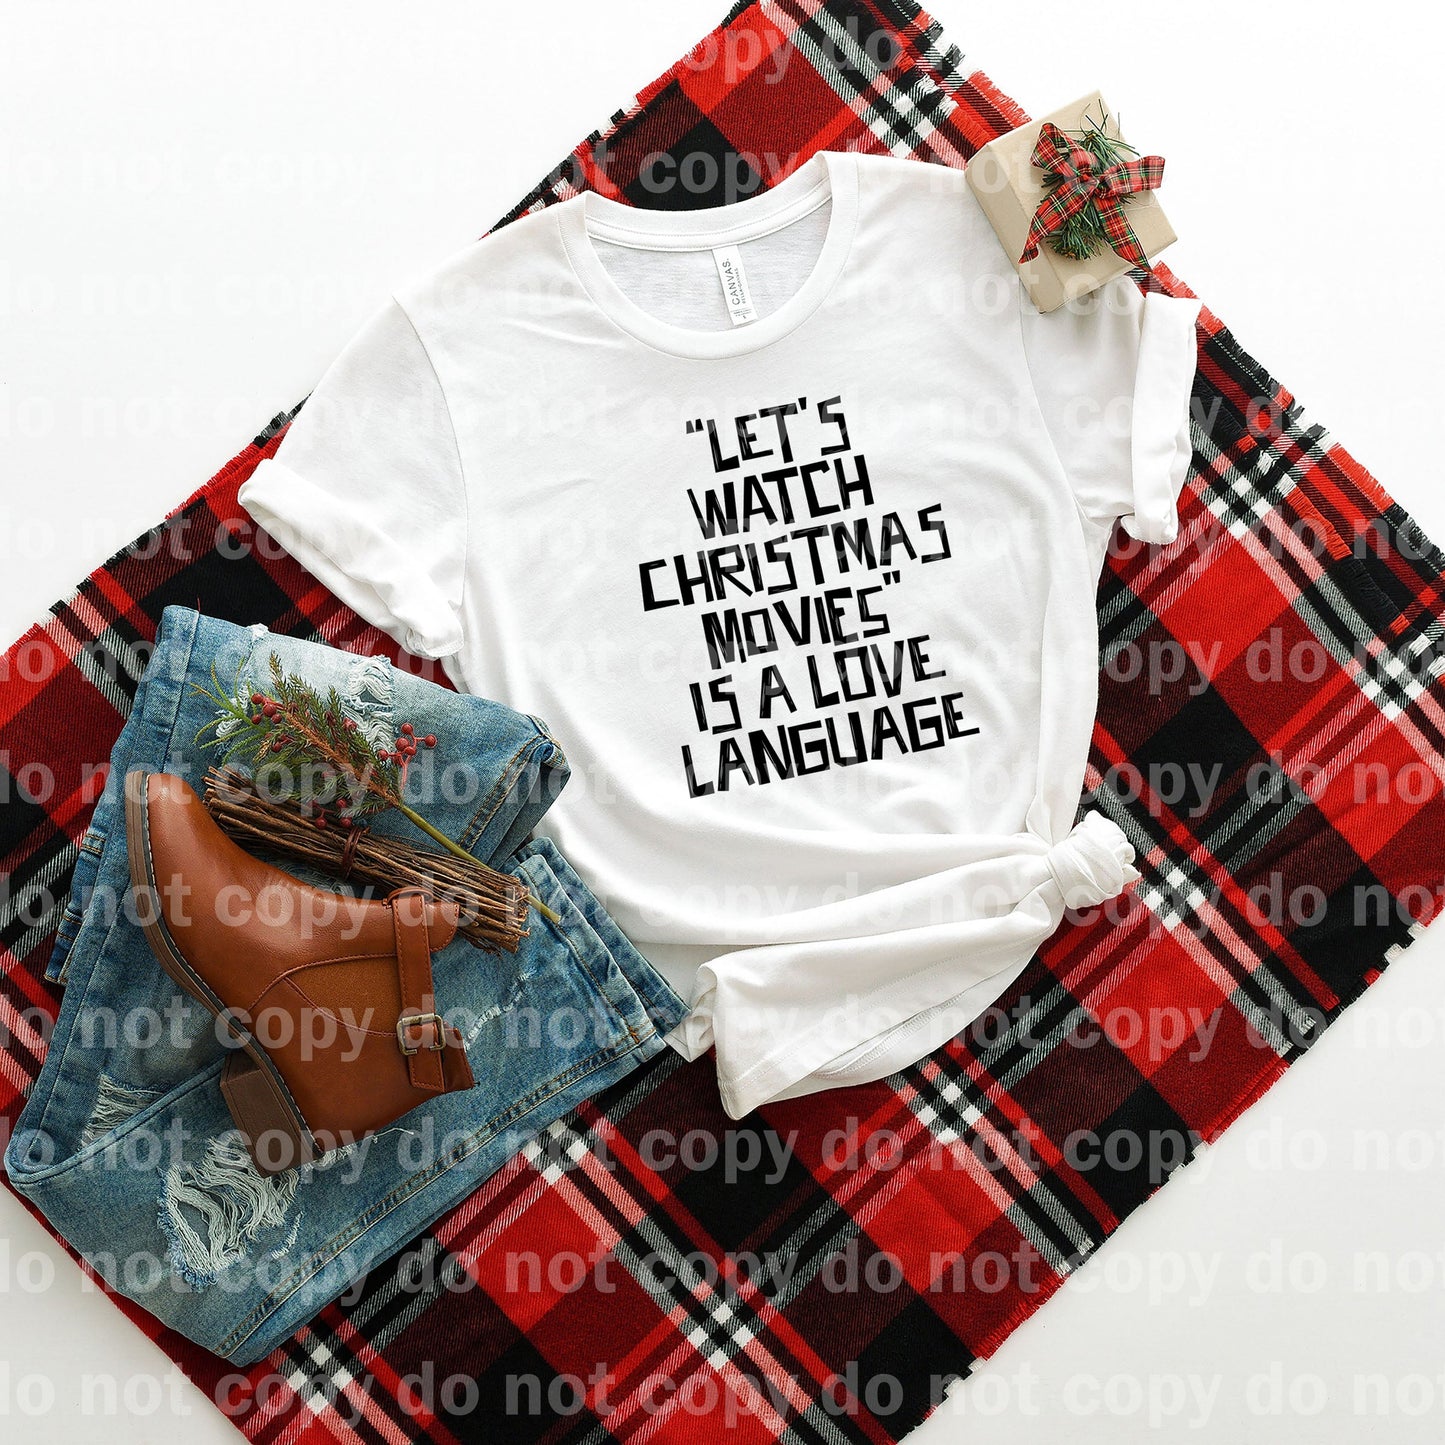 "Let's Watch Christmas Movies" Is A Love Language Dream Print or Sublimation Print